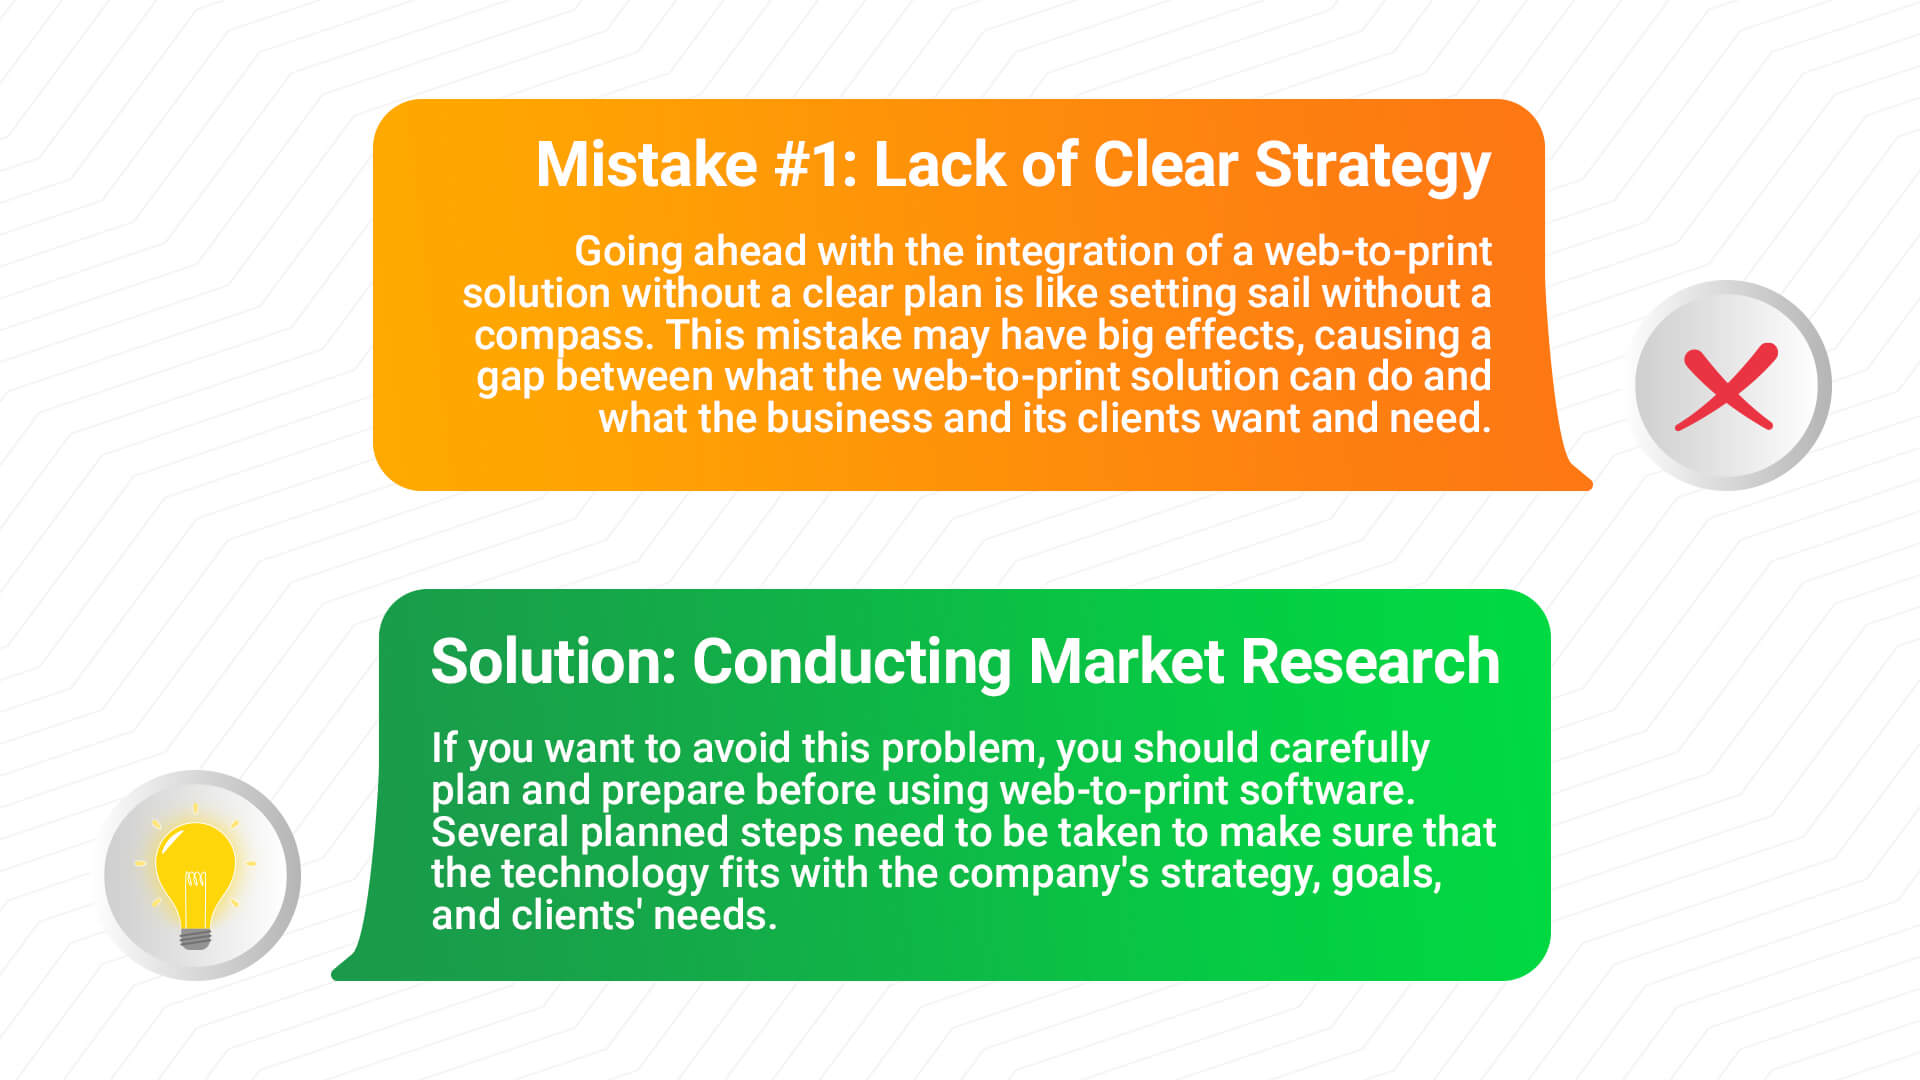 Mistake #1: Lack of Clear Strategy